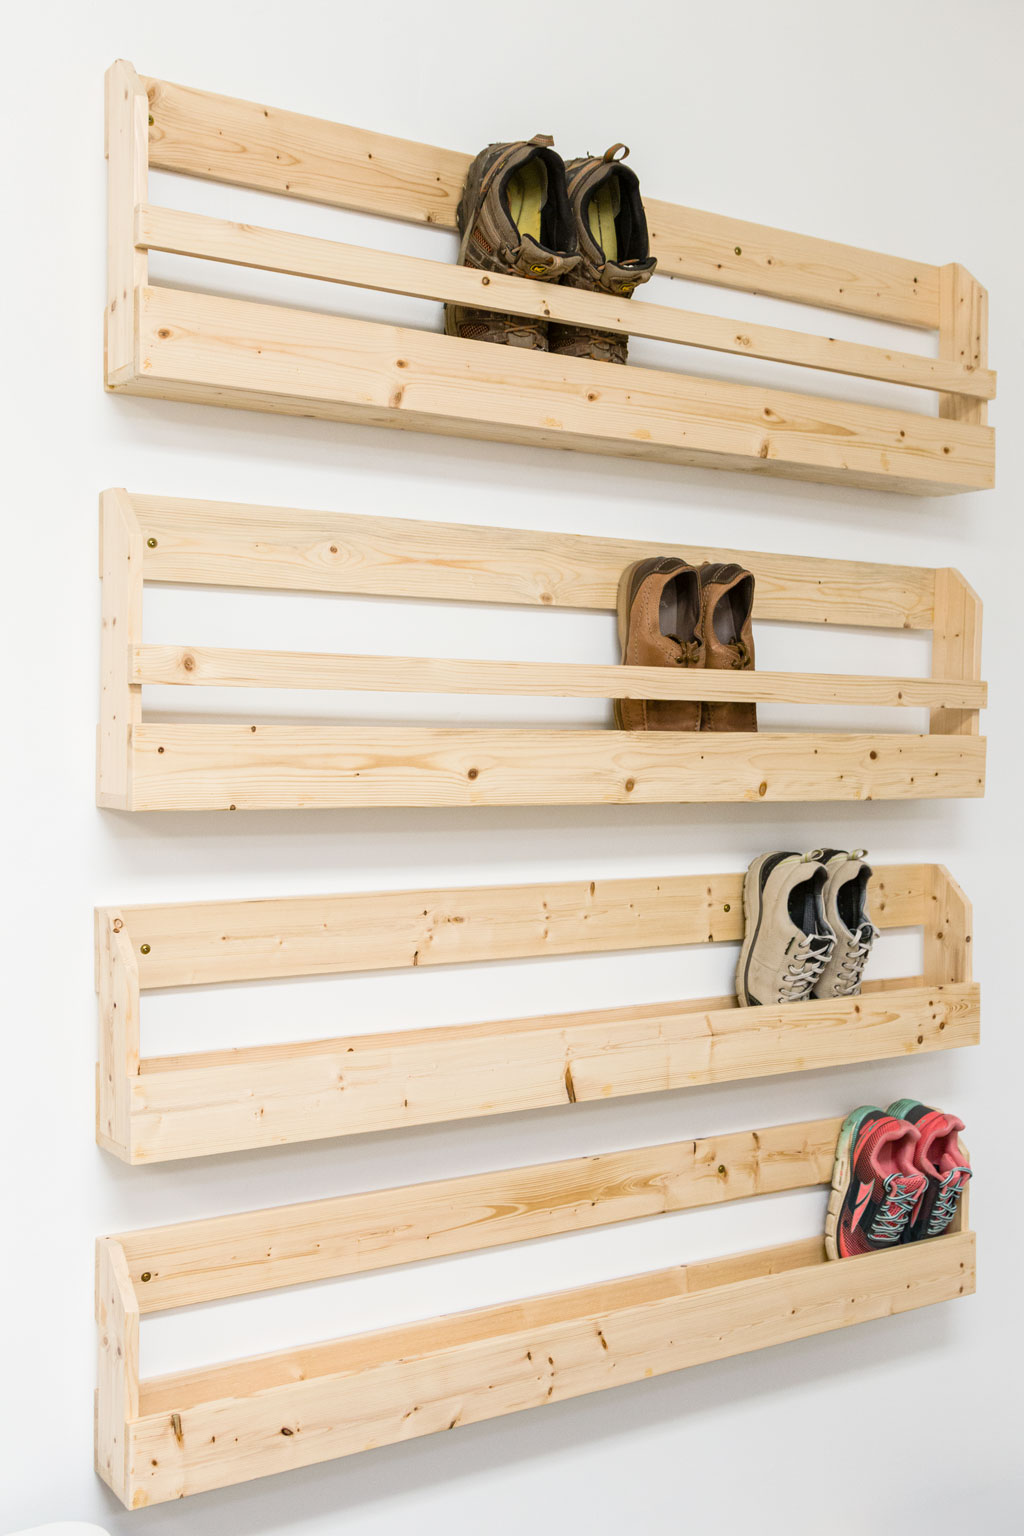 DIY Wooden shoe display attached to the wall